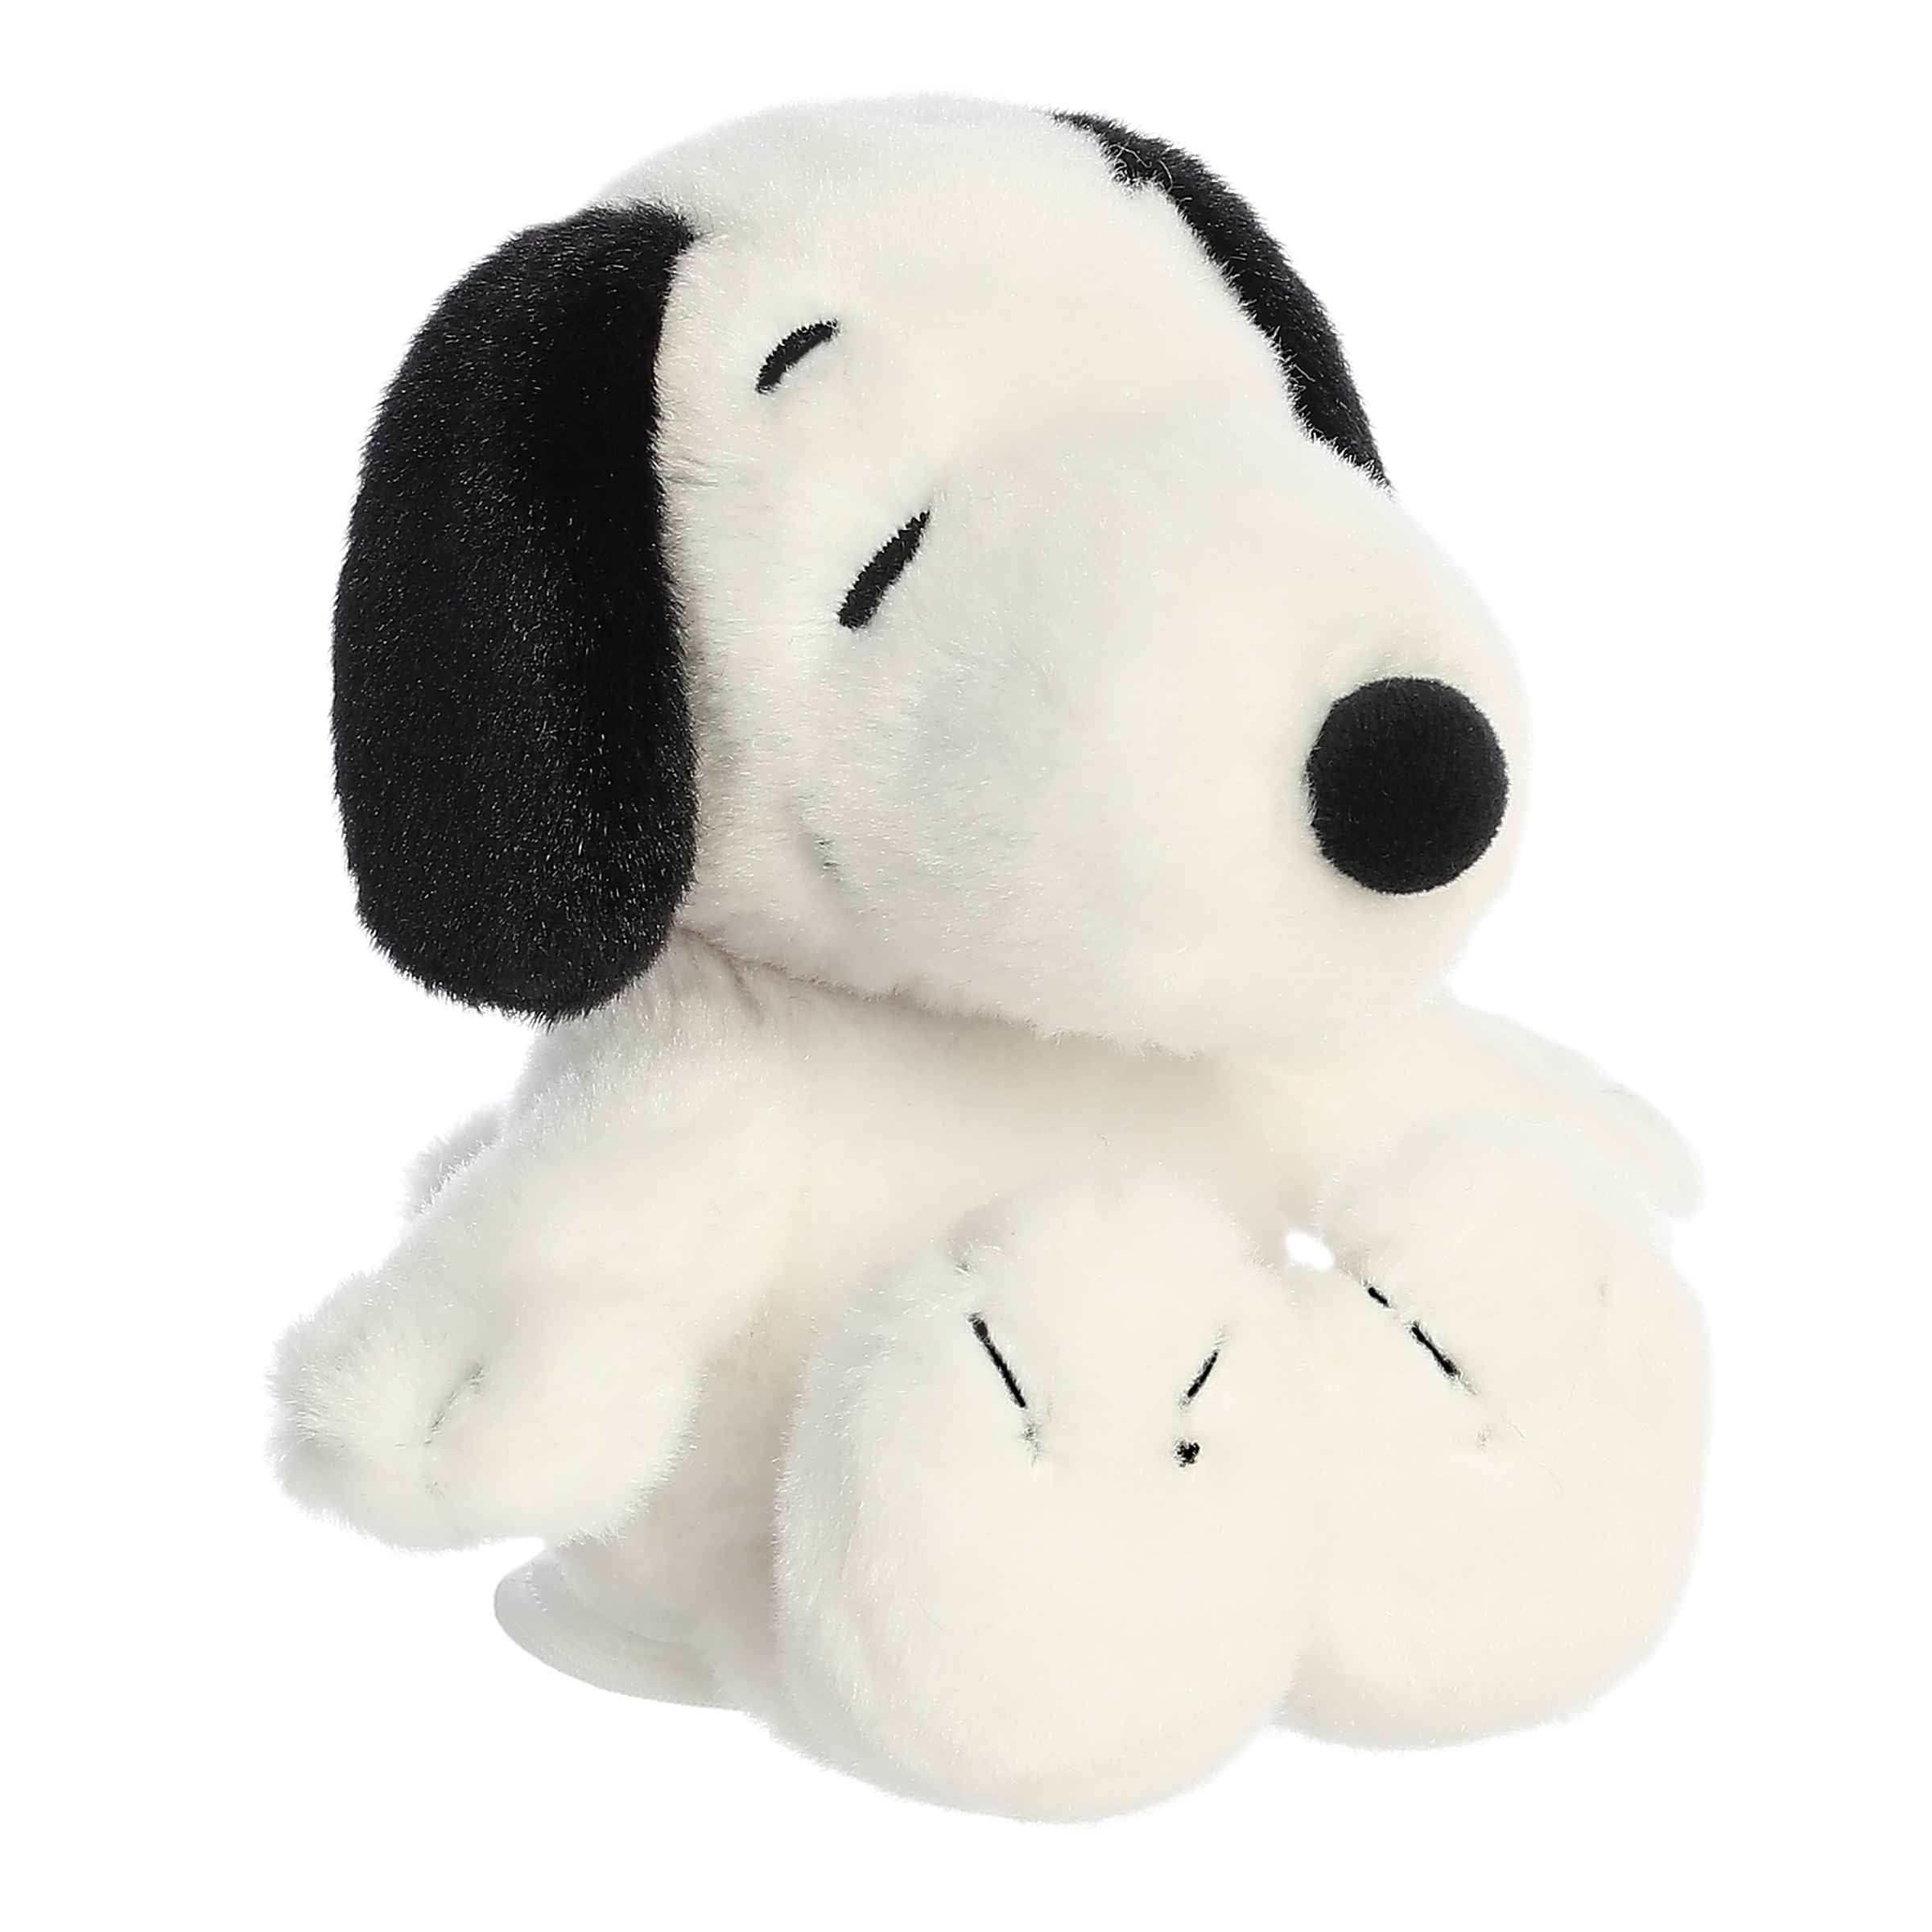 Snoopy Shoulderkins, soft plush with hidden magnet, perches on shoulder for secure, playful companionship from Peanuts